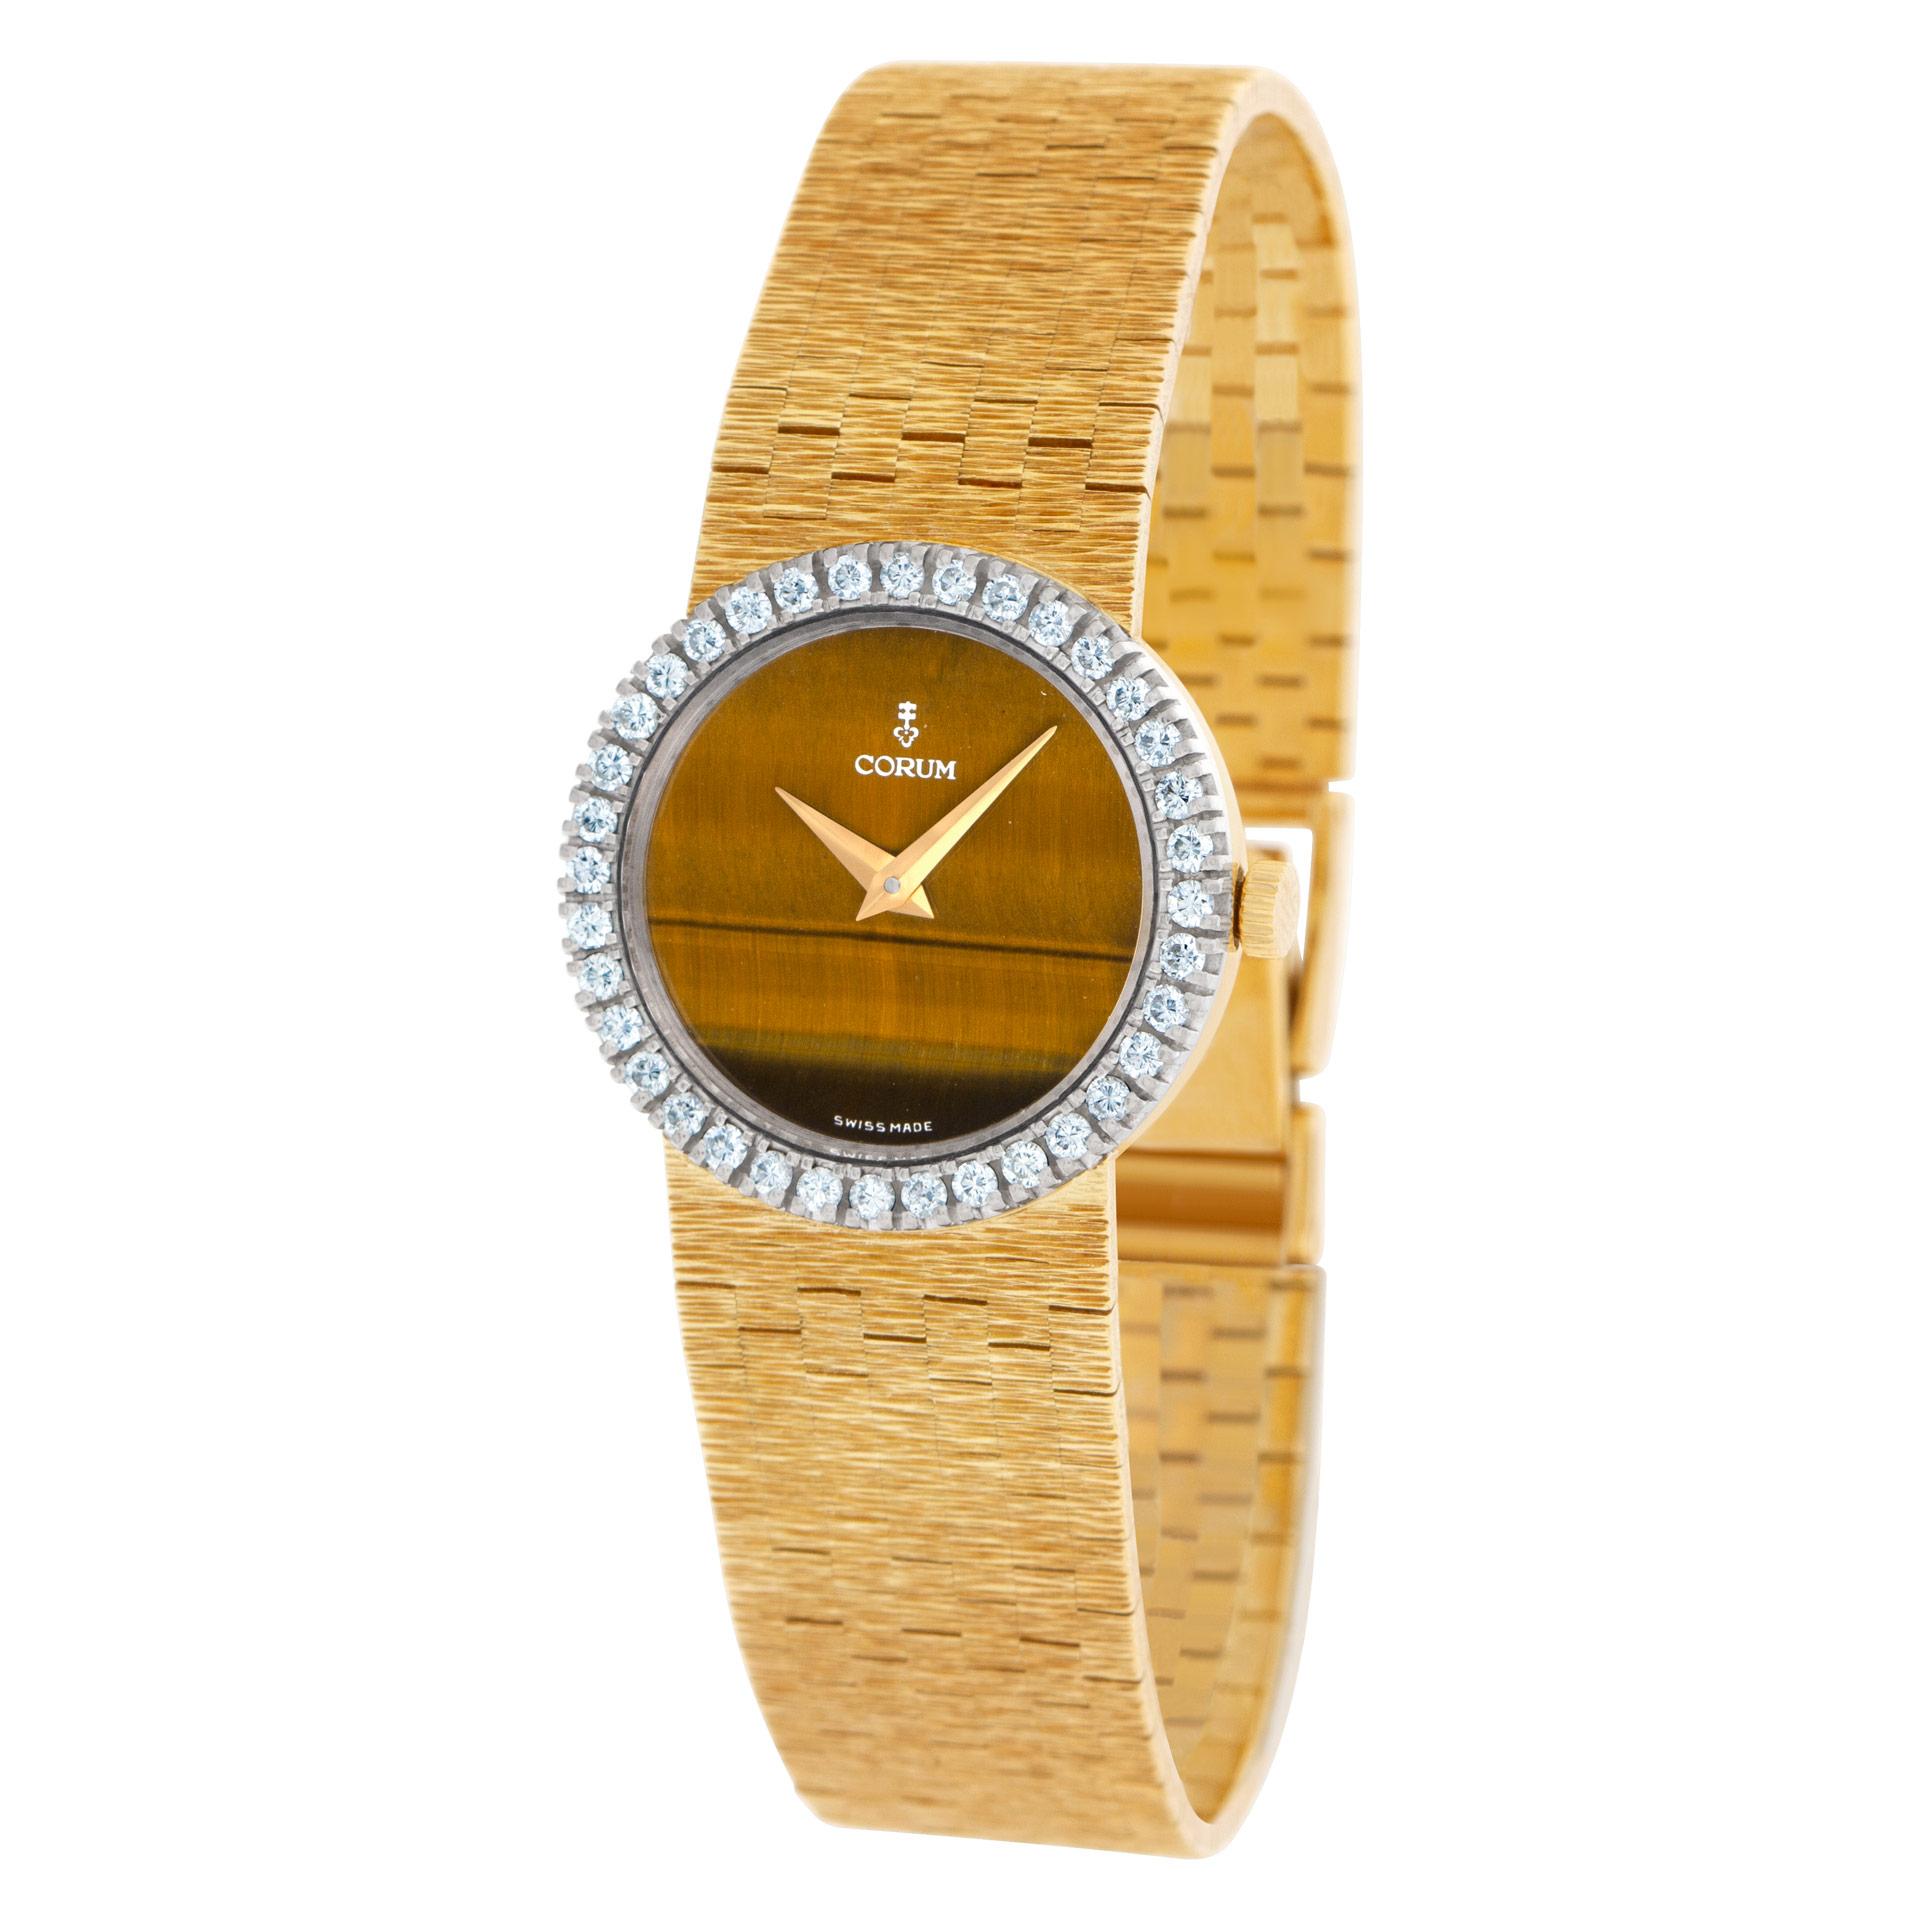 Corum 17J manual wind watch in 18k yellow gold with original factory diamond bezel and tiger-eye dial. Ref 27382A60. 24mm case size. Fits 6.5 inches wrist. Circa 1980s. Fine Pre-owned Corum Watch. Certified preowned Classic Corum Classic 27382A60